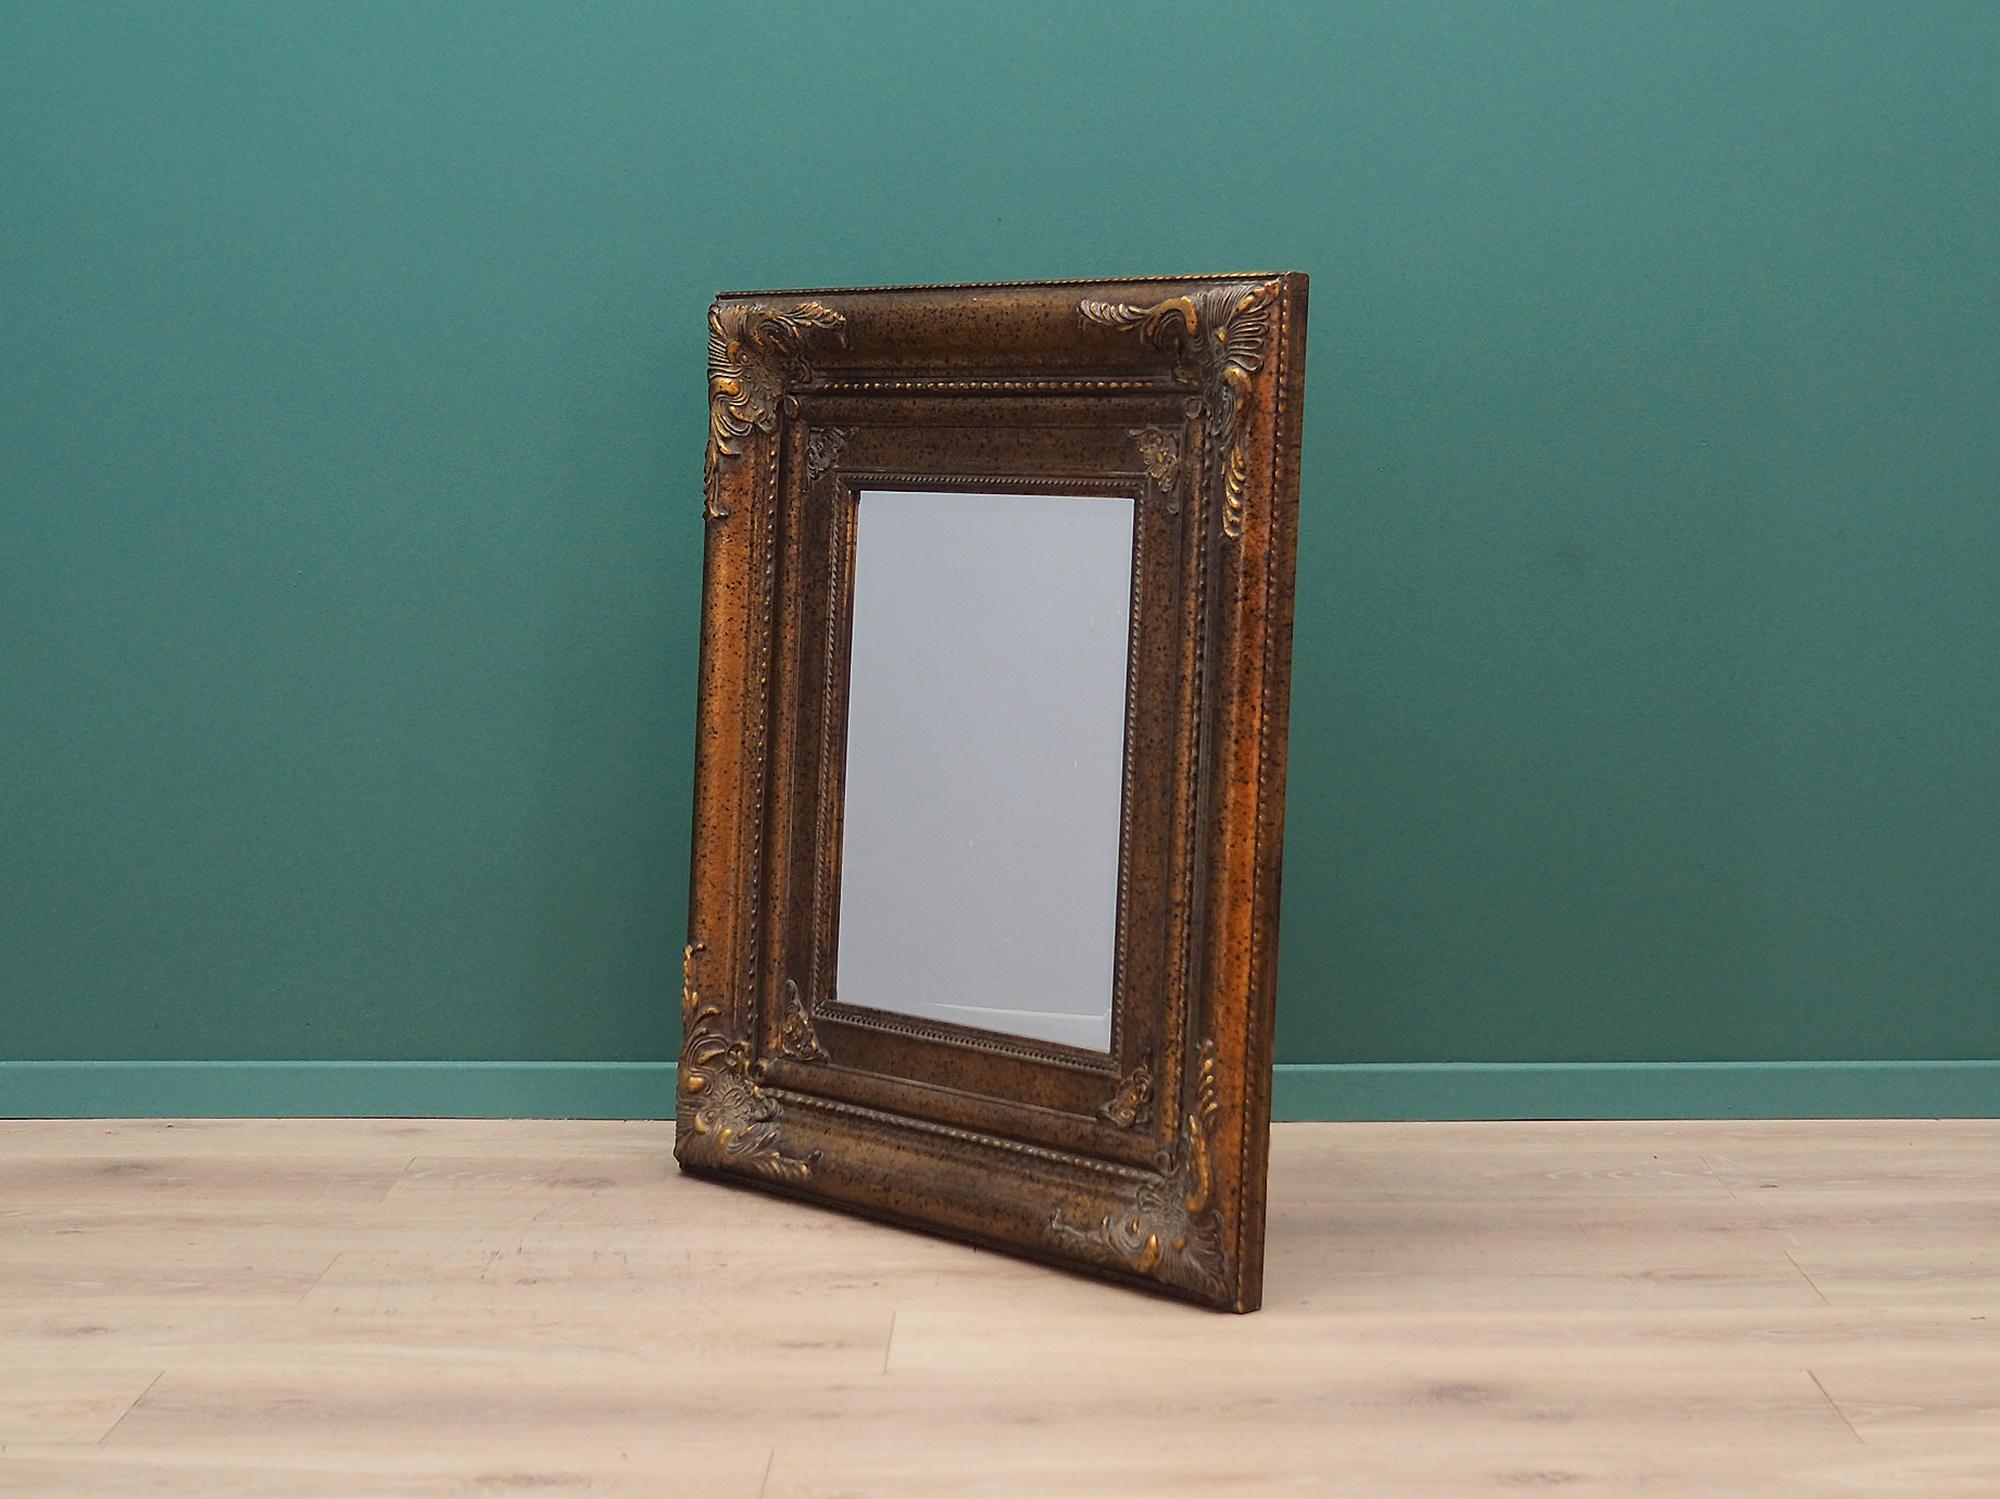 Fantastic mirror from the 1960s-1970s. Minimalist form, Scandinavian design. The mirror's frame is made of decorative plaster material. Preserved in good condition (minor scratches on the frame, mirror without damage) - directly for